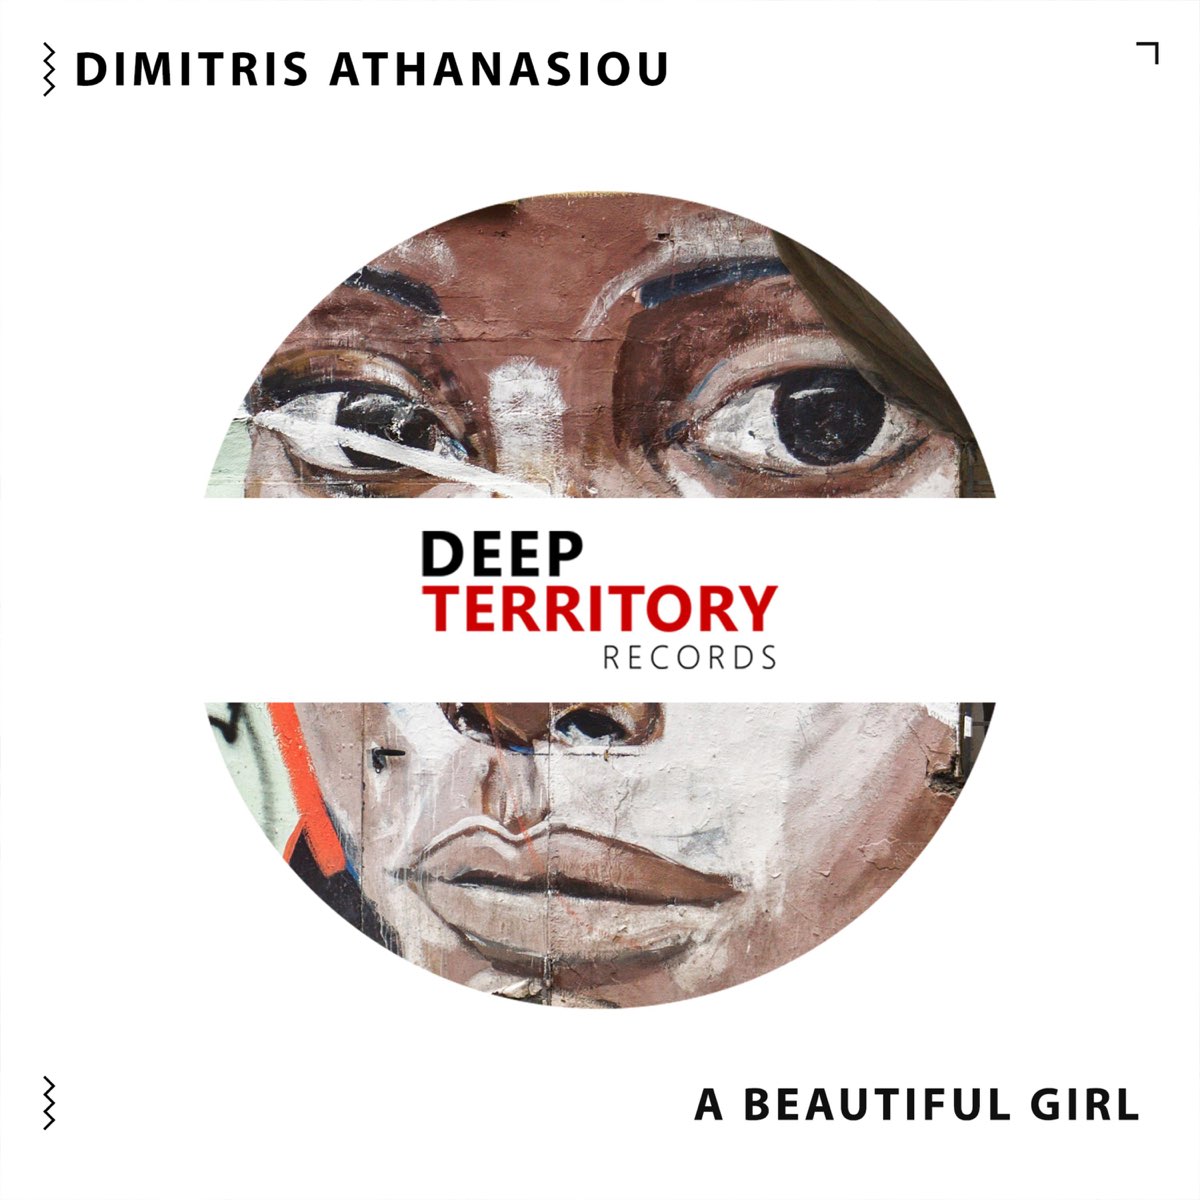 A Beautiful Girl - Single by Dimitris Athanasiou on Apple Music